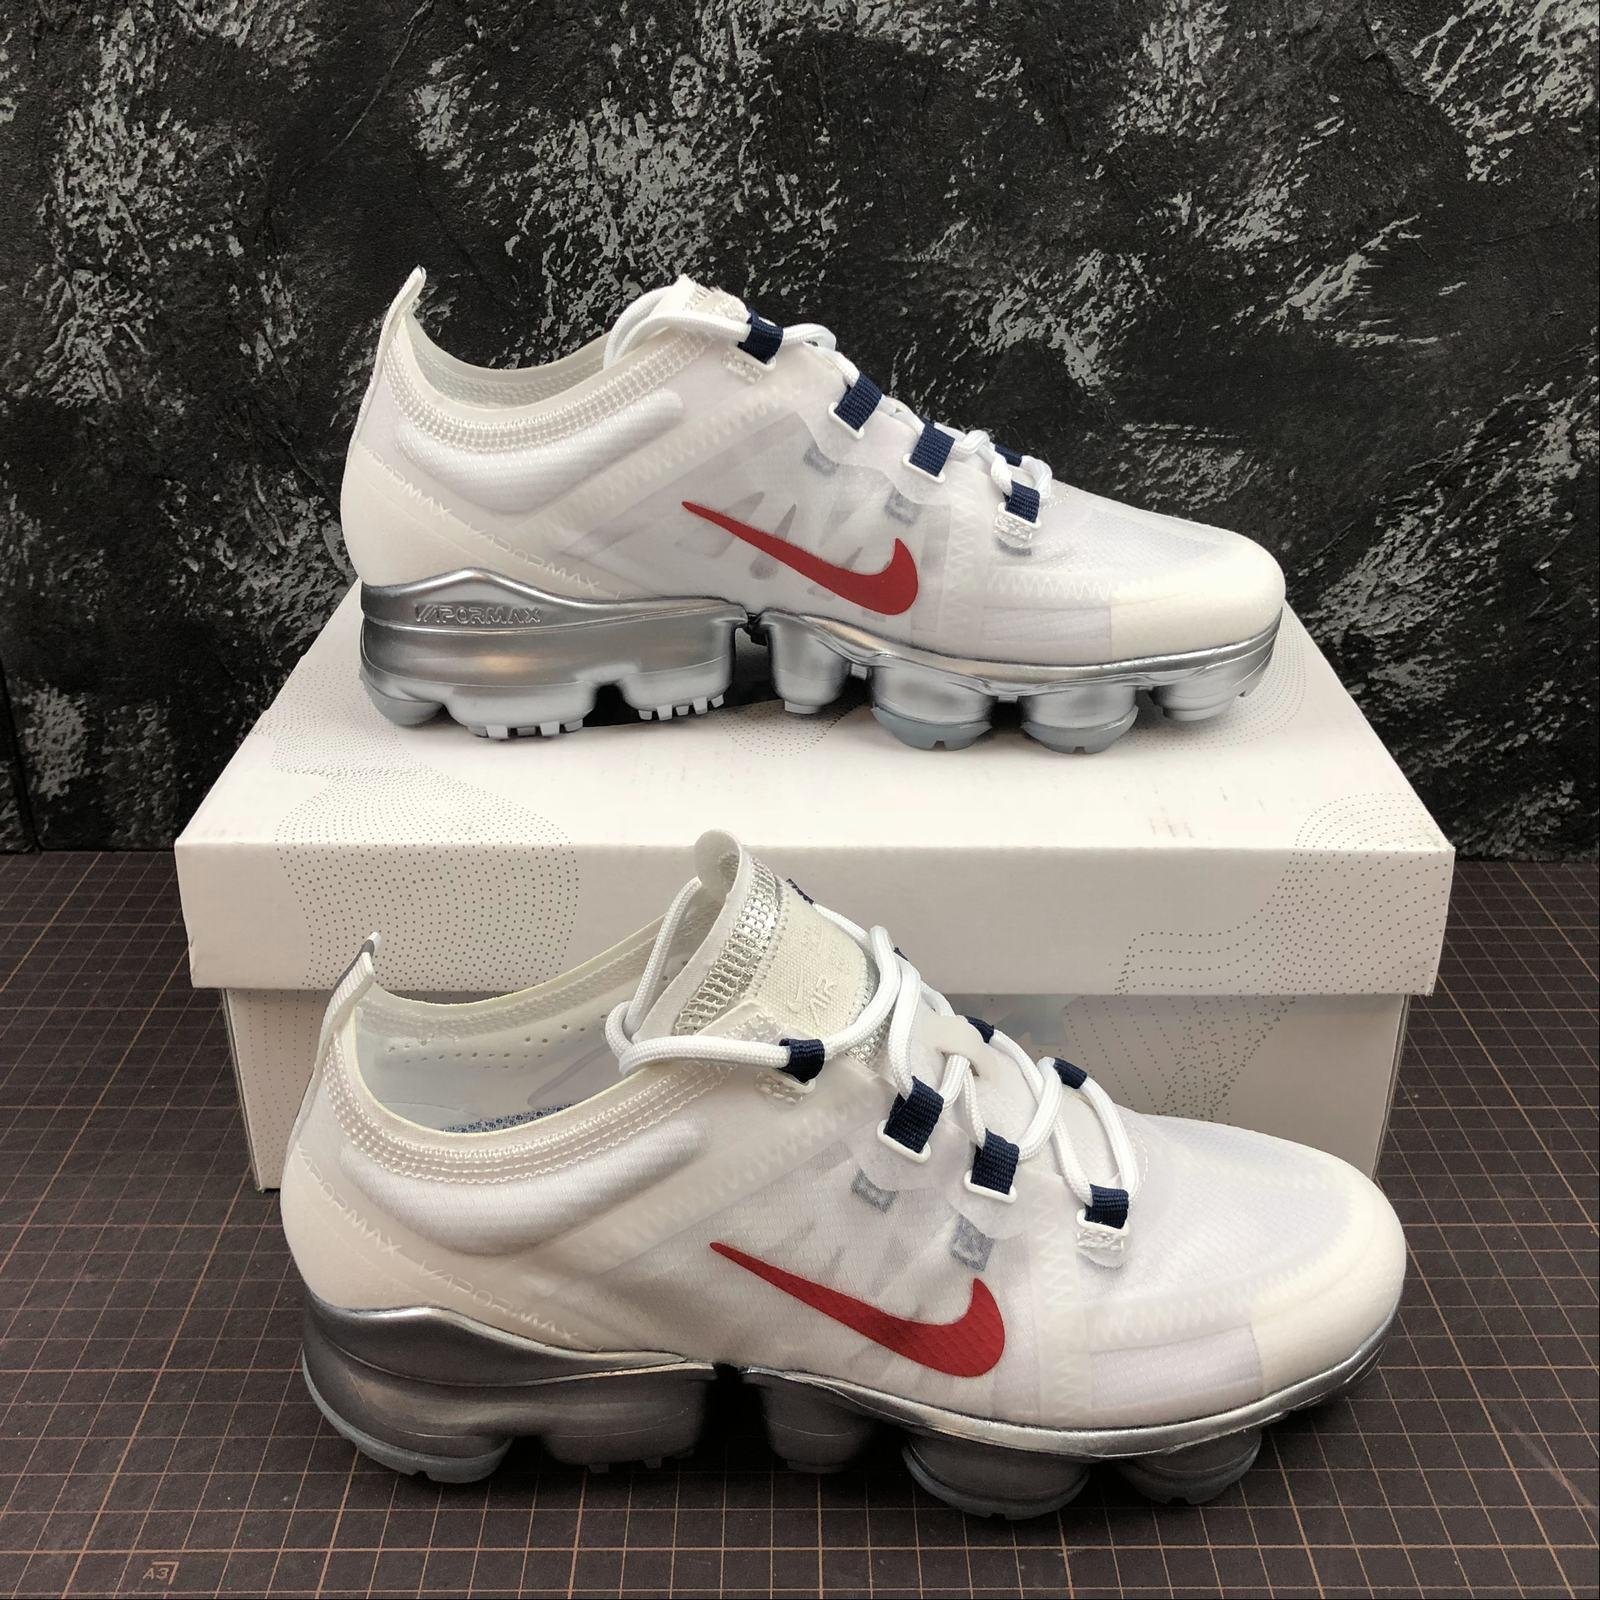 More styles are showed here: :http://2942273488.x.yupoo.com/search/album?uid=1&q=2019+NIKE+AIR+VAPORMAX